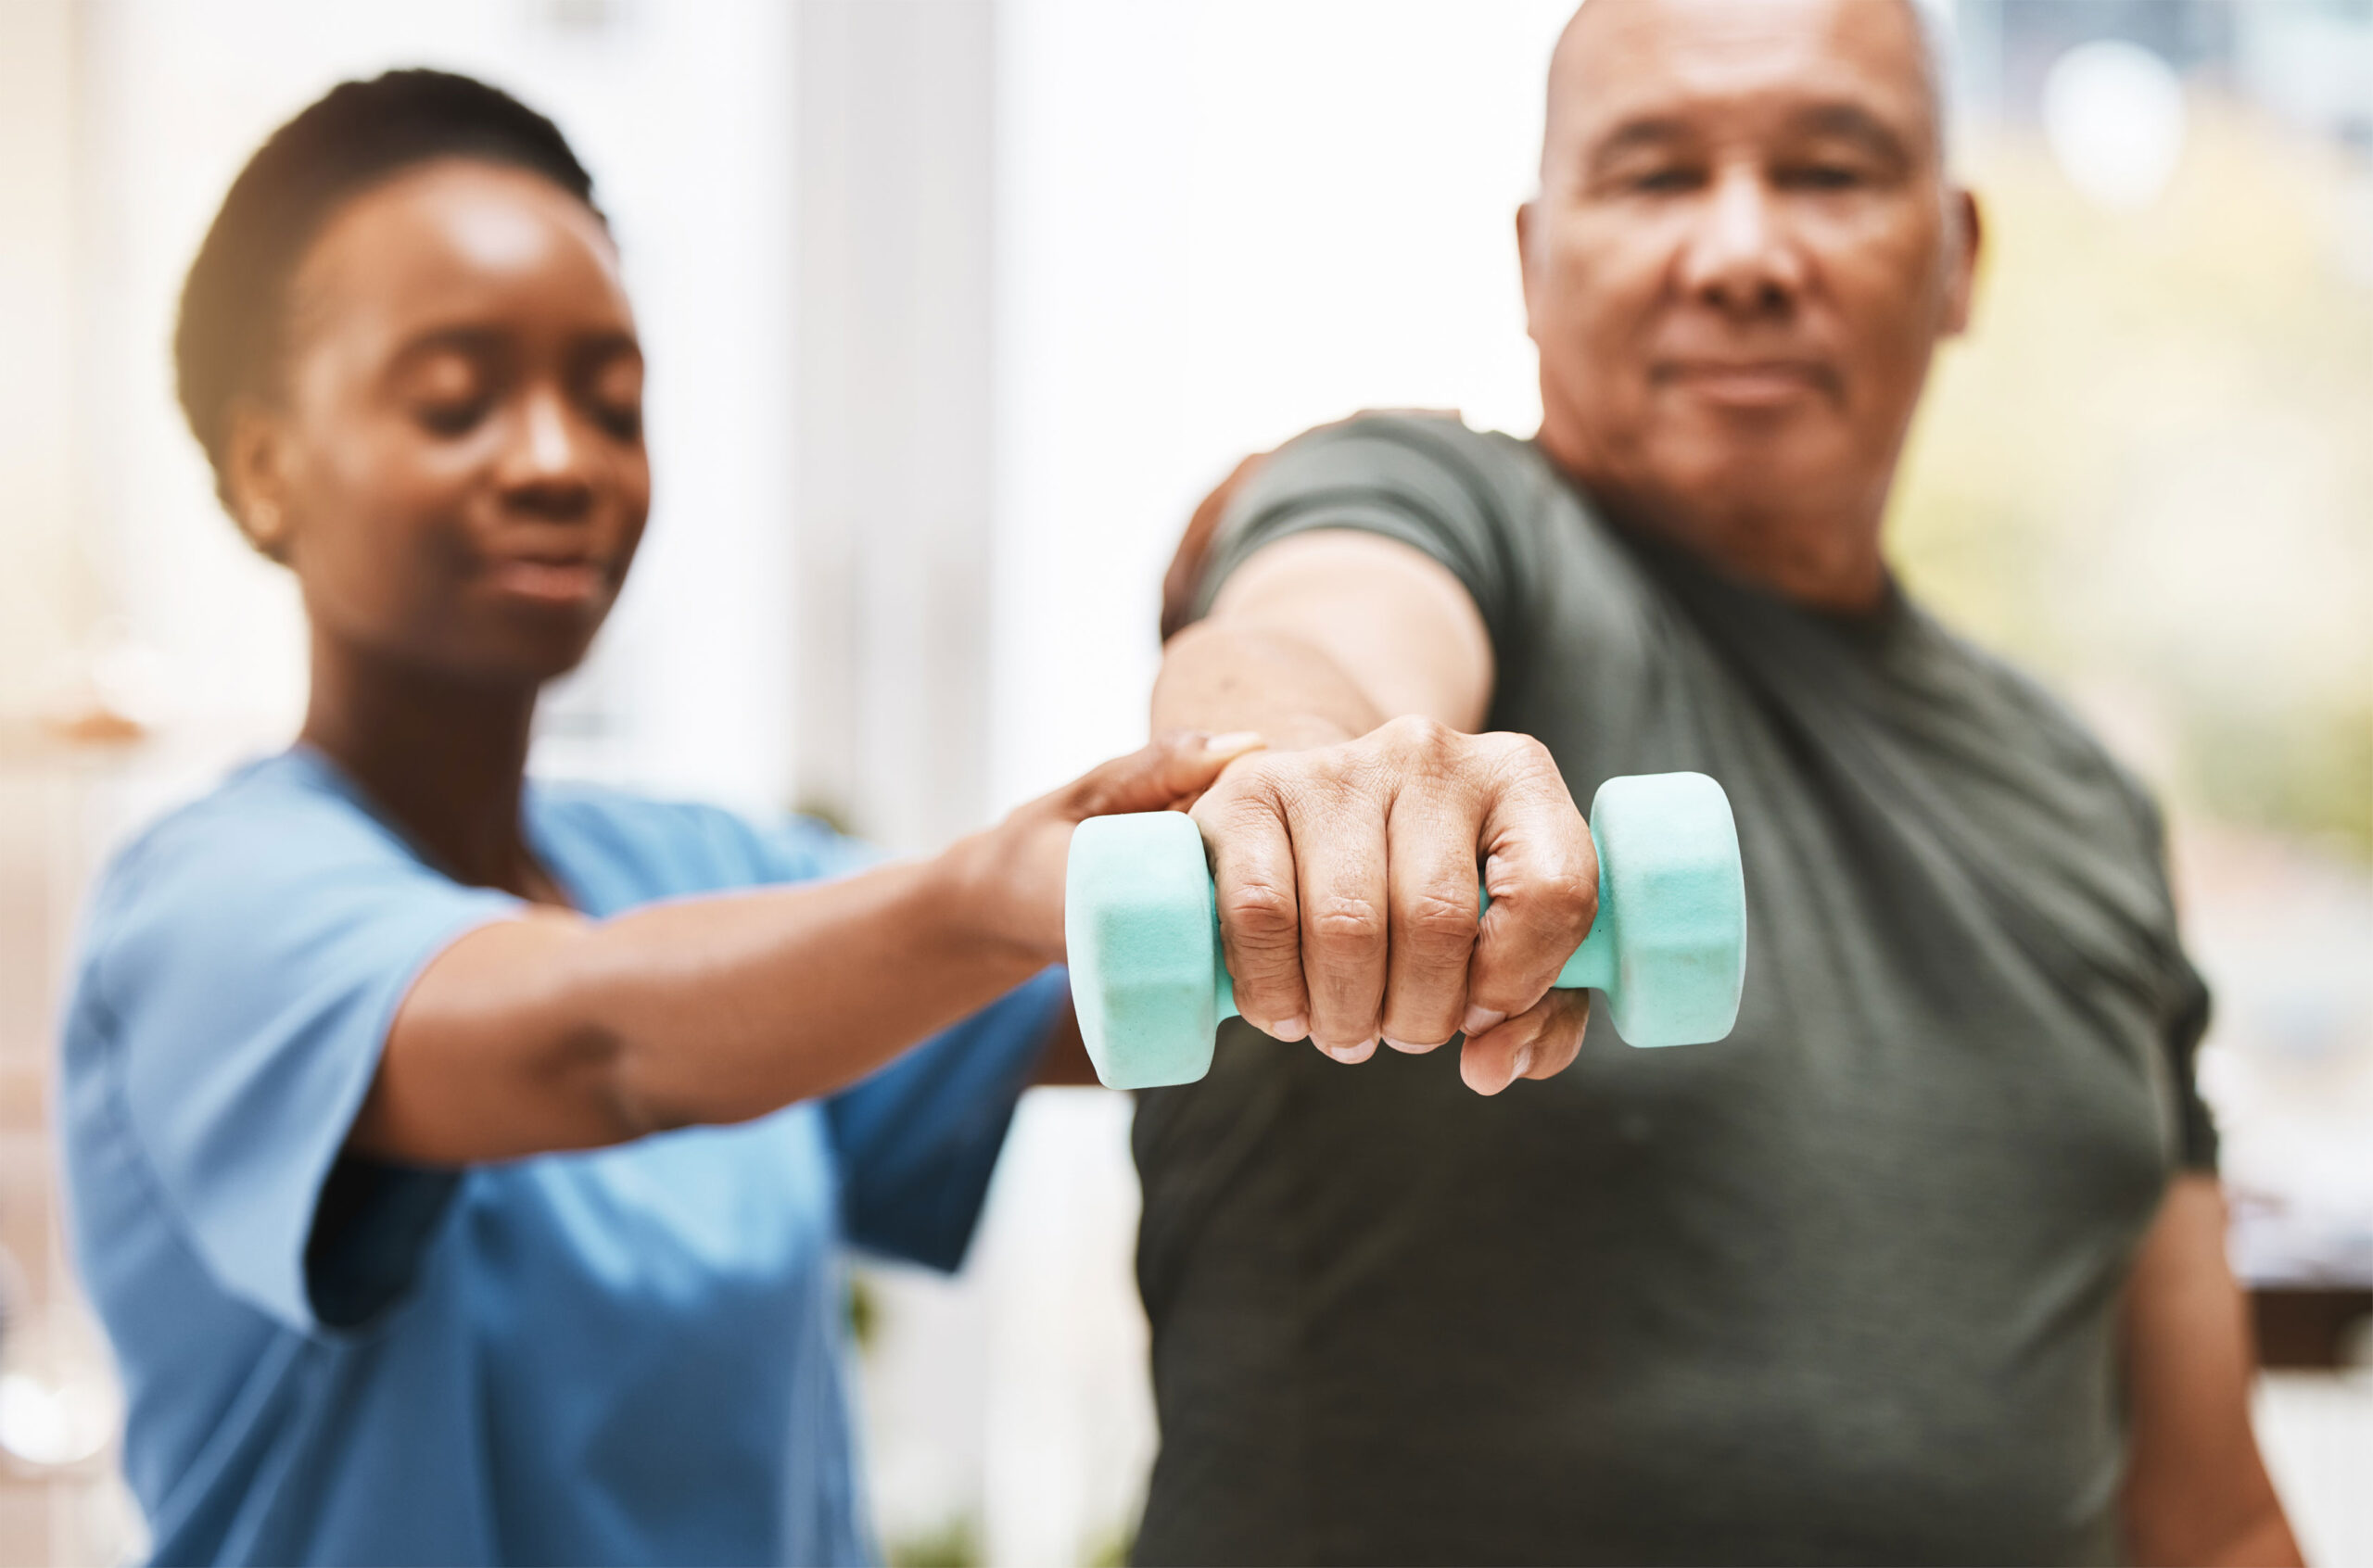 Middle age man holds a light dumbbell in his outstretched arm while therapist stands next to him and lightly supporting his wrist holding the weight.